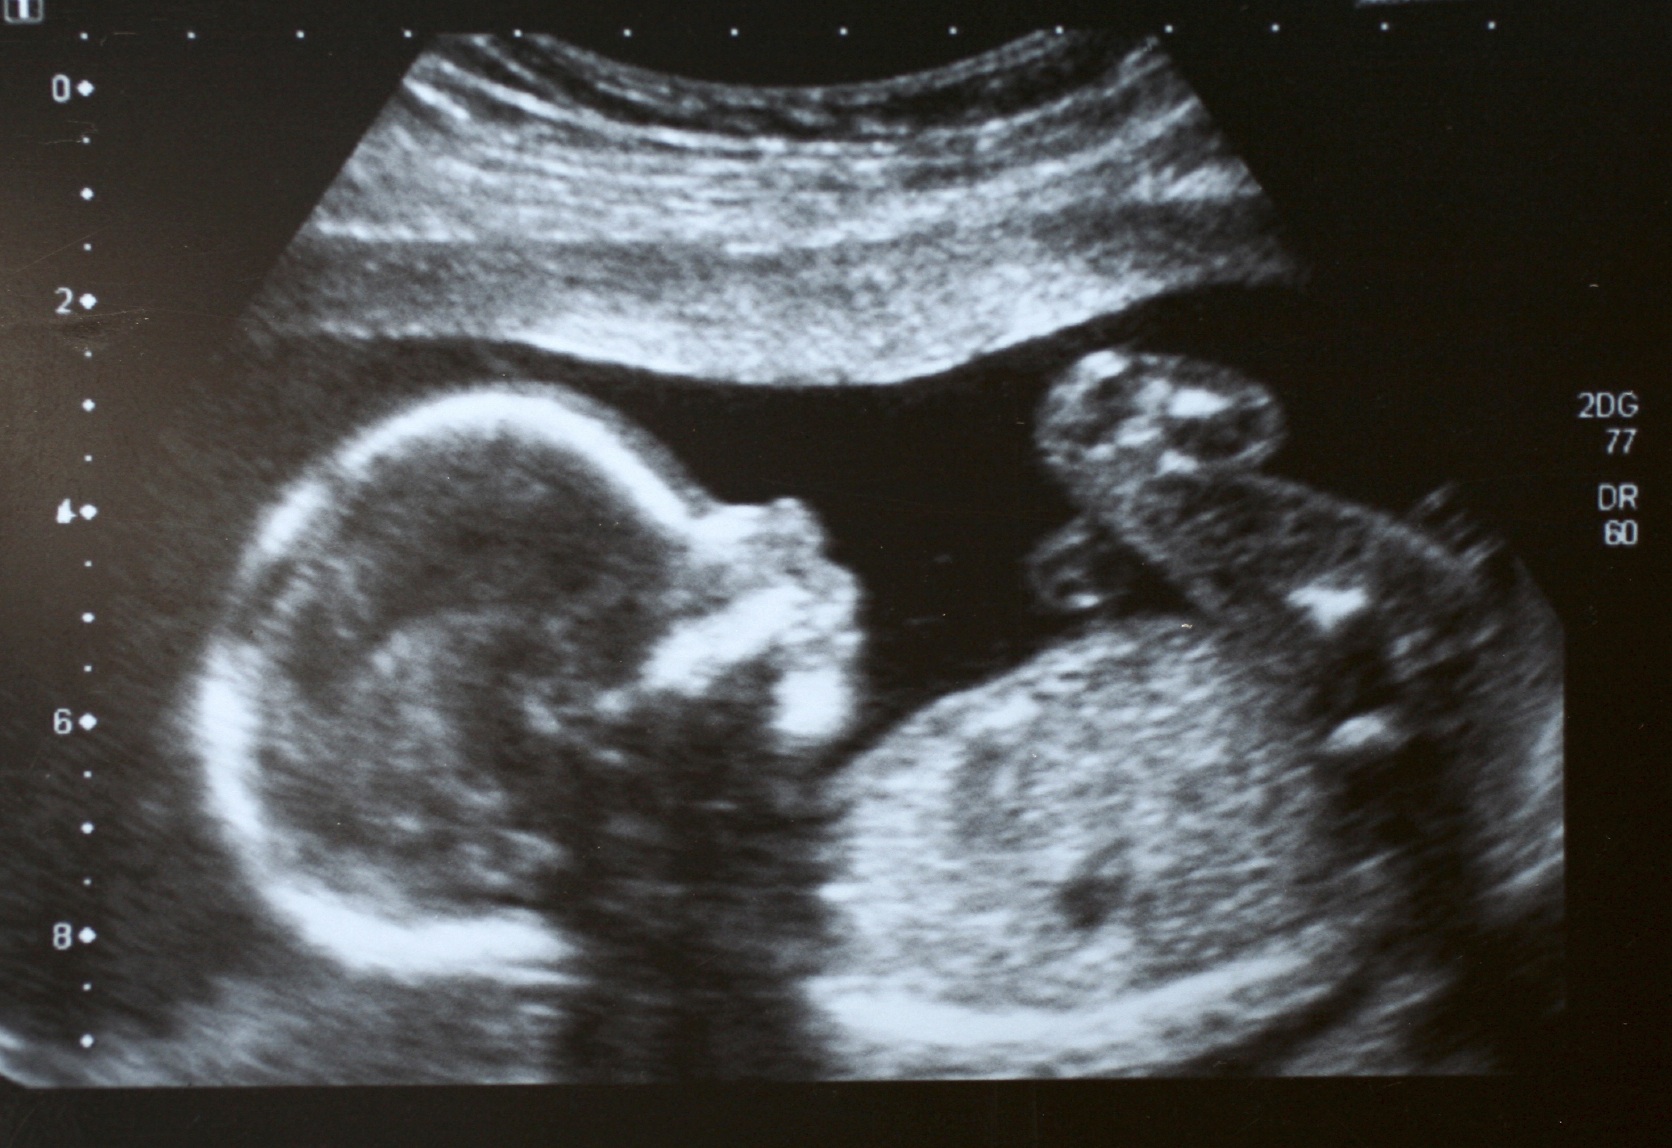 Loma Linda OB/GYN develops scan determining whether unborn babies are Adventist